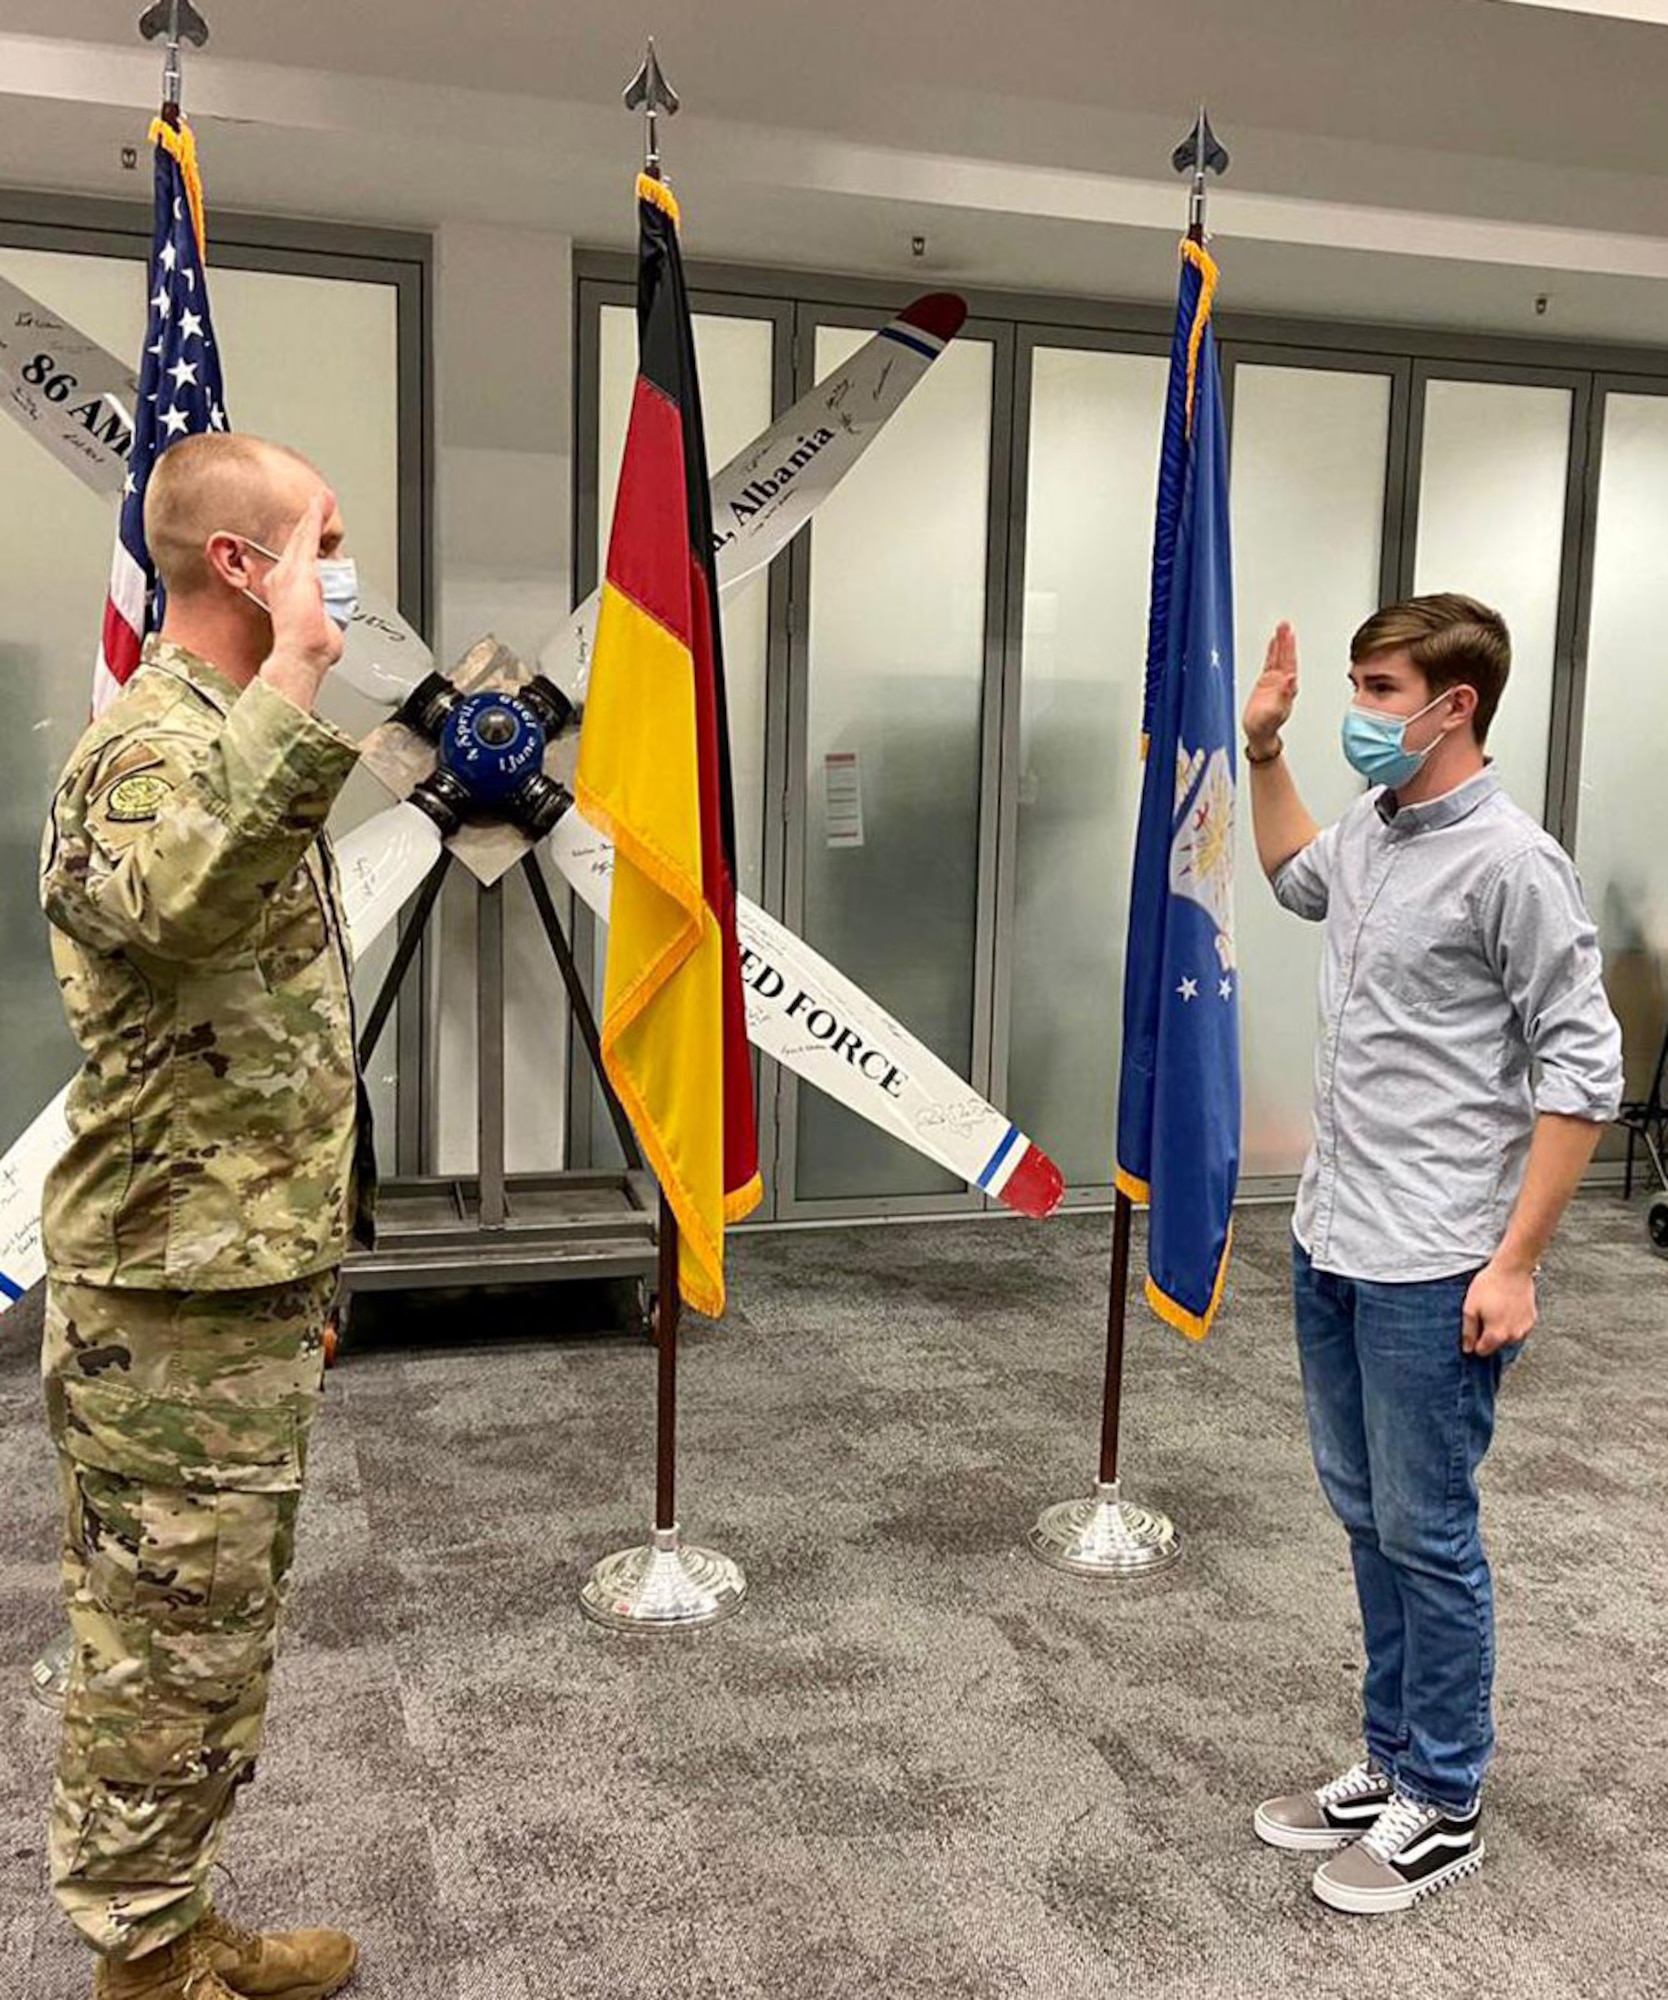 U.S. Air Force Lt. Col. Ryan Roper, 435th Contingency Response Support Squadron commander administers the oath of enlistment to Ethan Williams at Ramstein Air Base, Germany, May 17, 2021. Ethan is the fourth generation of his family to serve in the U.S. Armed Forces. As he begins his career, his father, Master Sgt. Daniel Williams, 435th CRSS air advisor operations superintendent, will retire. (Courtesy photo)